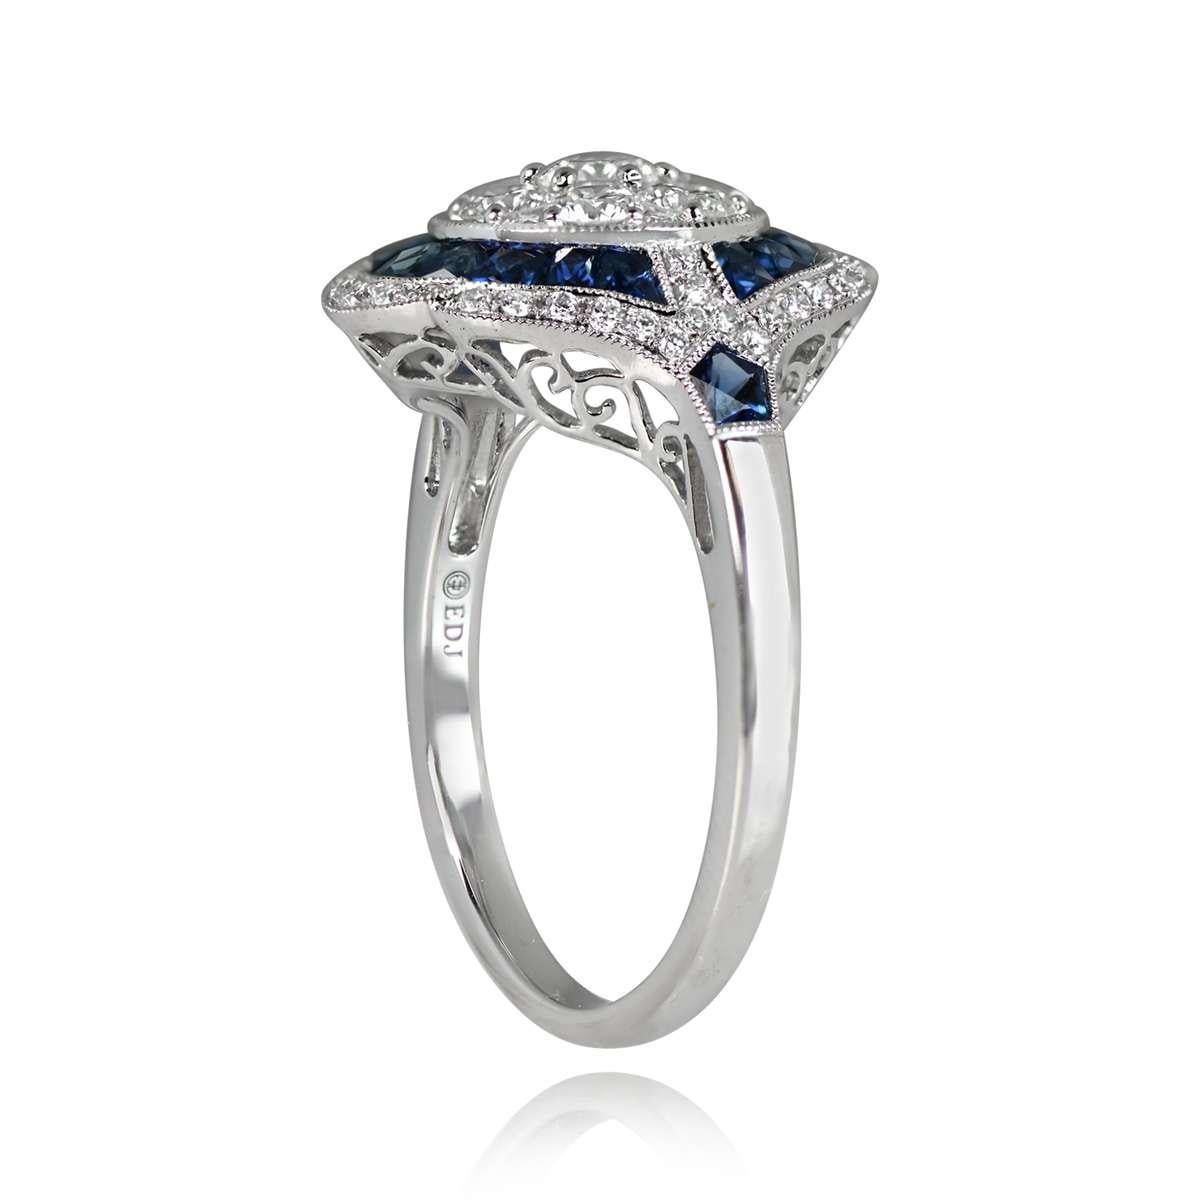 An exquisite Art Deco-style platinum ring adorned with a cluster of round brilliant-cut diamonds at the center. A double halo of natural blue French-cut sapphires and diamonds surrounds the centerpiece. This ring boasts a low-profile design.

Ring